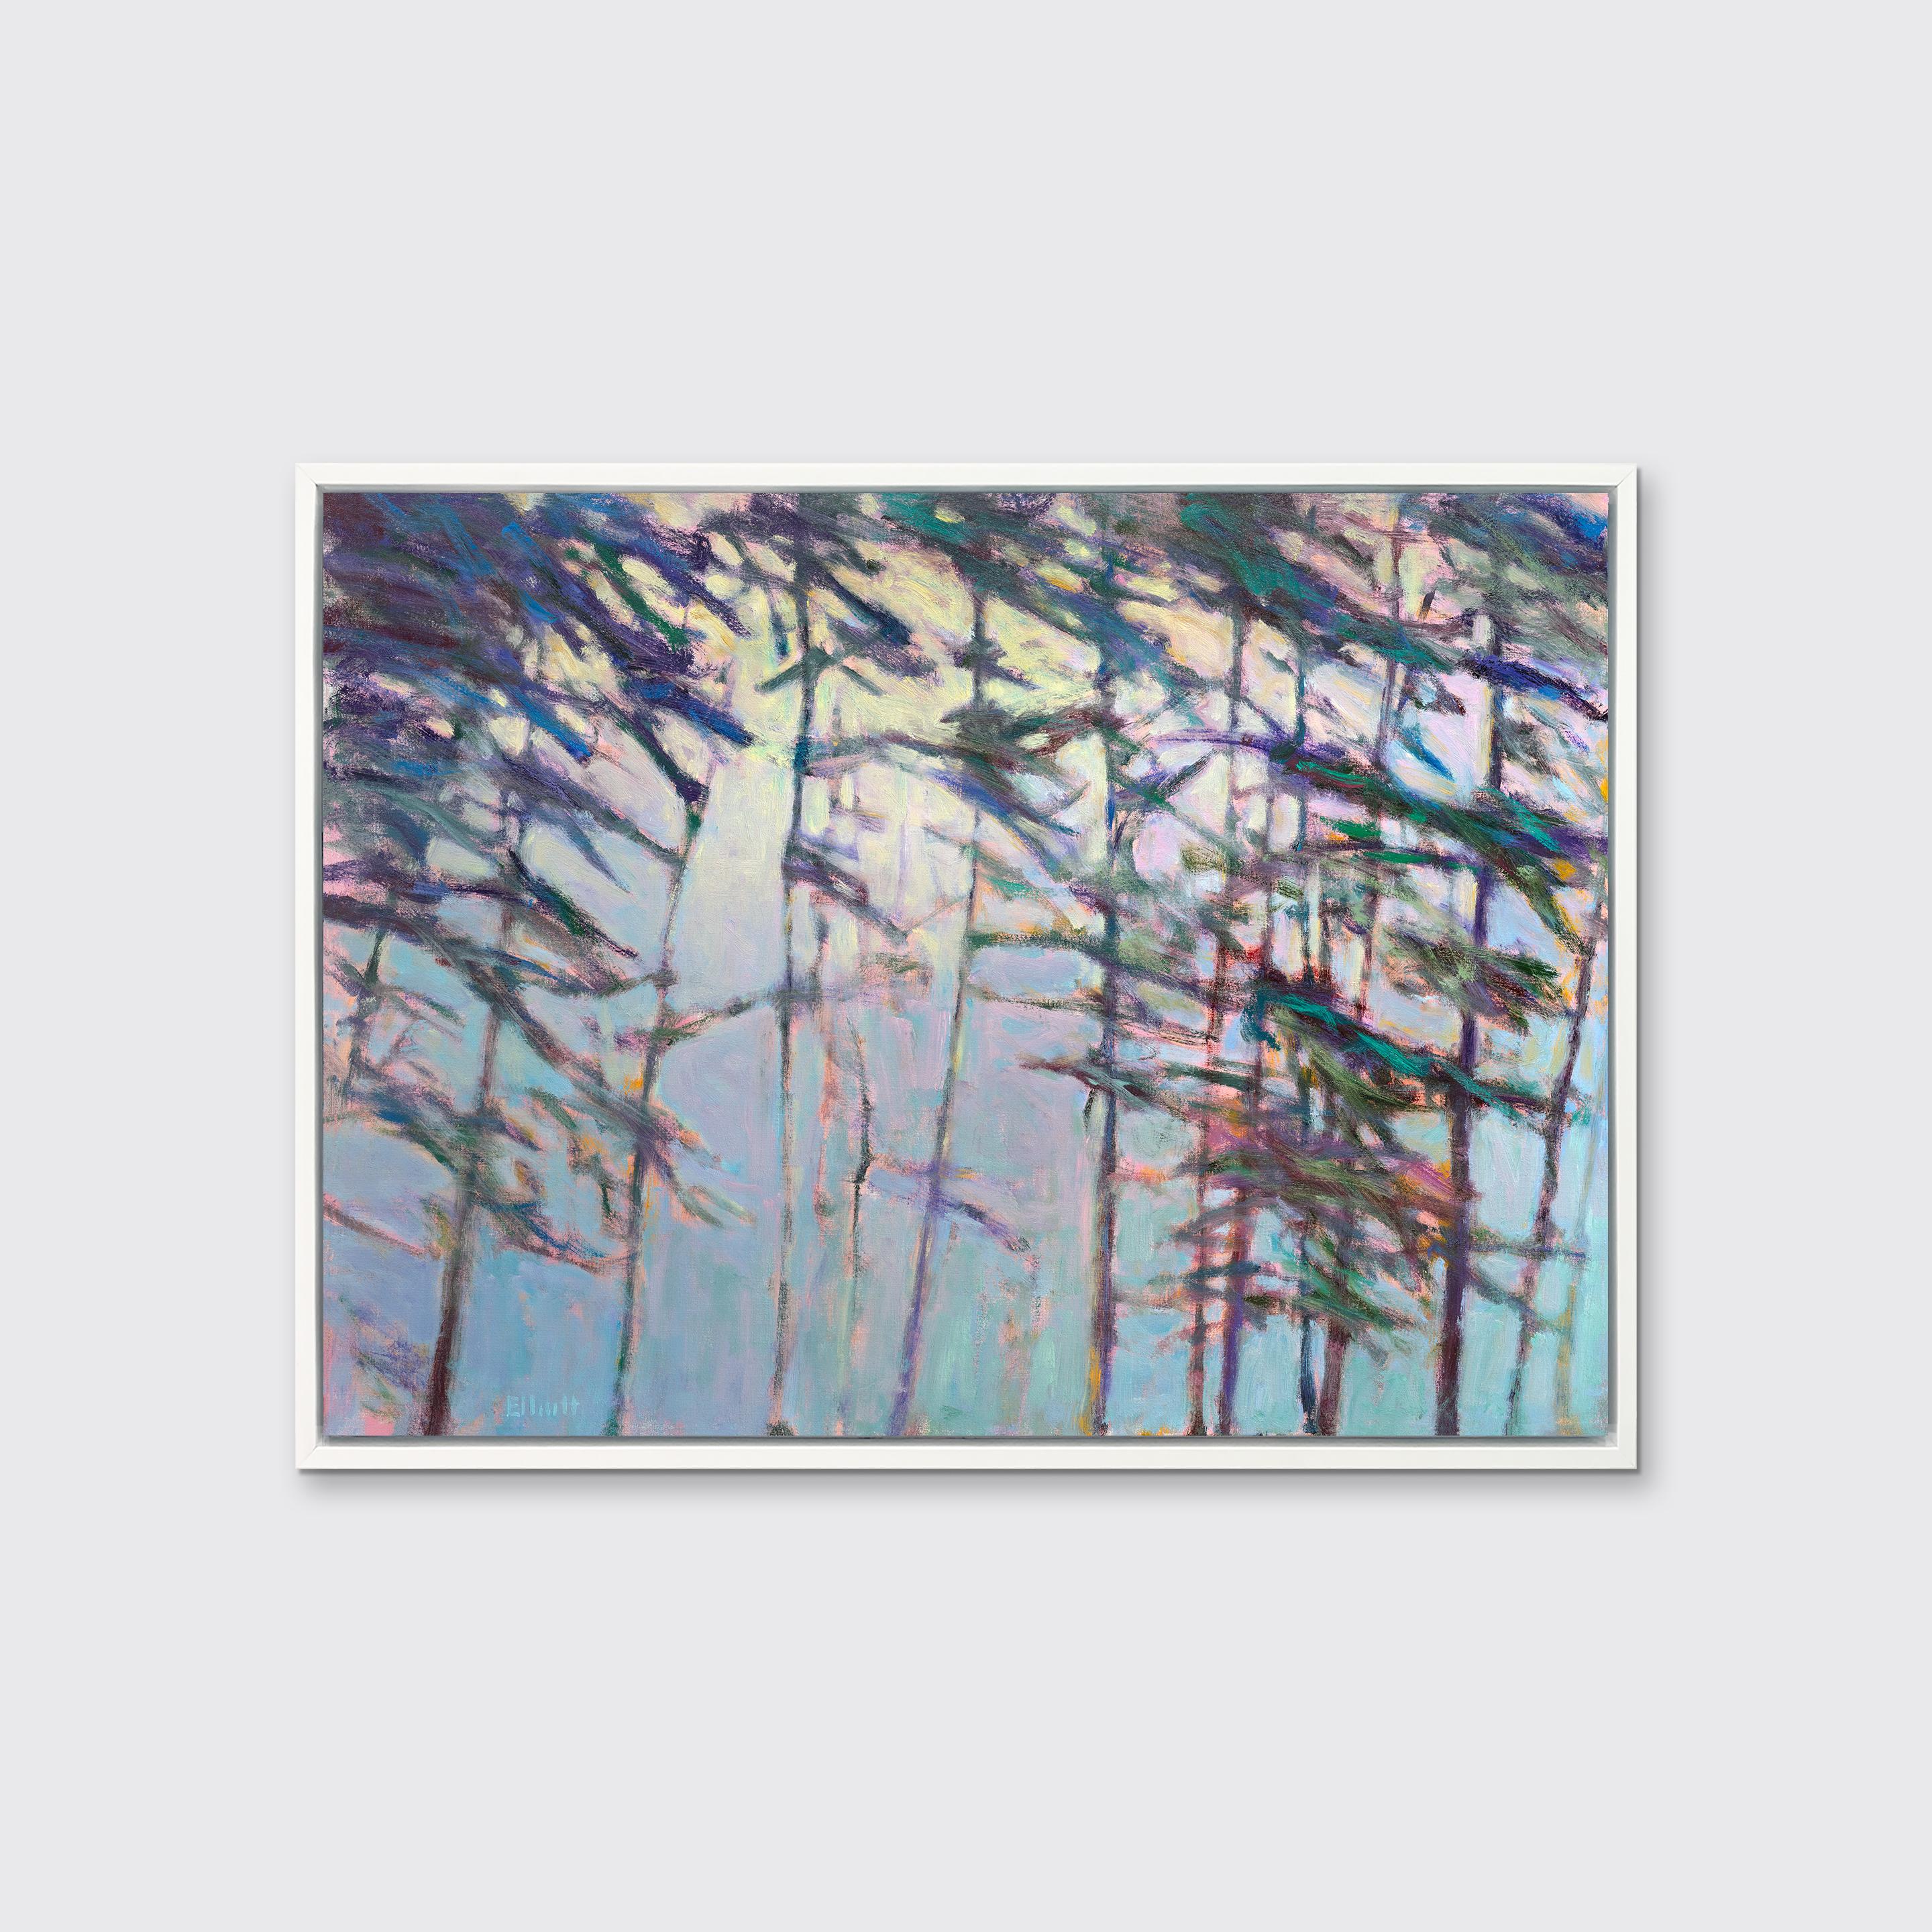 This contemporary abstract landscape limited edition giclee print by Ken Elliott features abstracted trees in a cool-toned palette. The energetic blue and violet brush strokes that make up the tree trunks and leaves are warmed by a deep pink accent